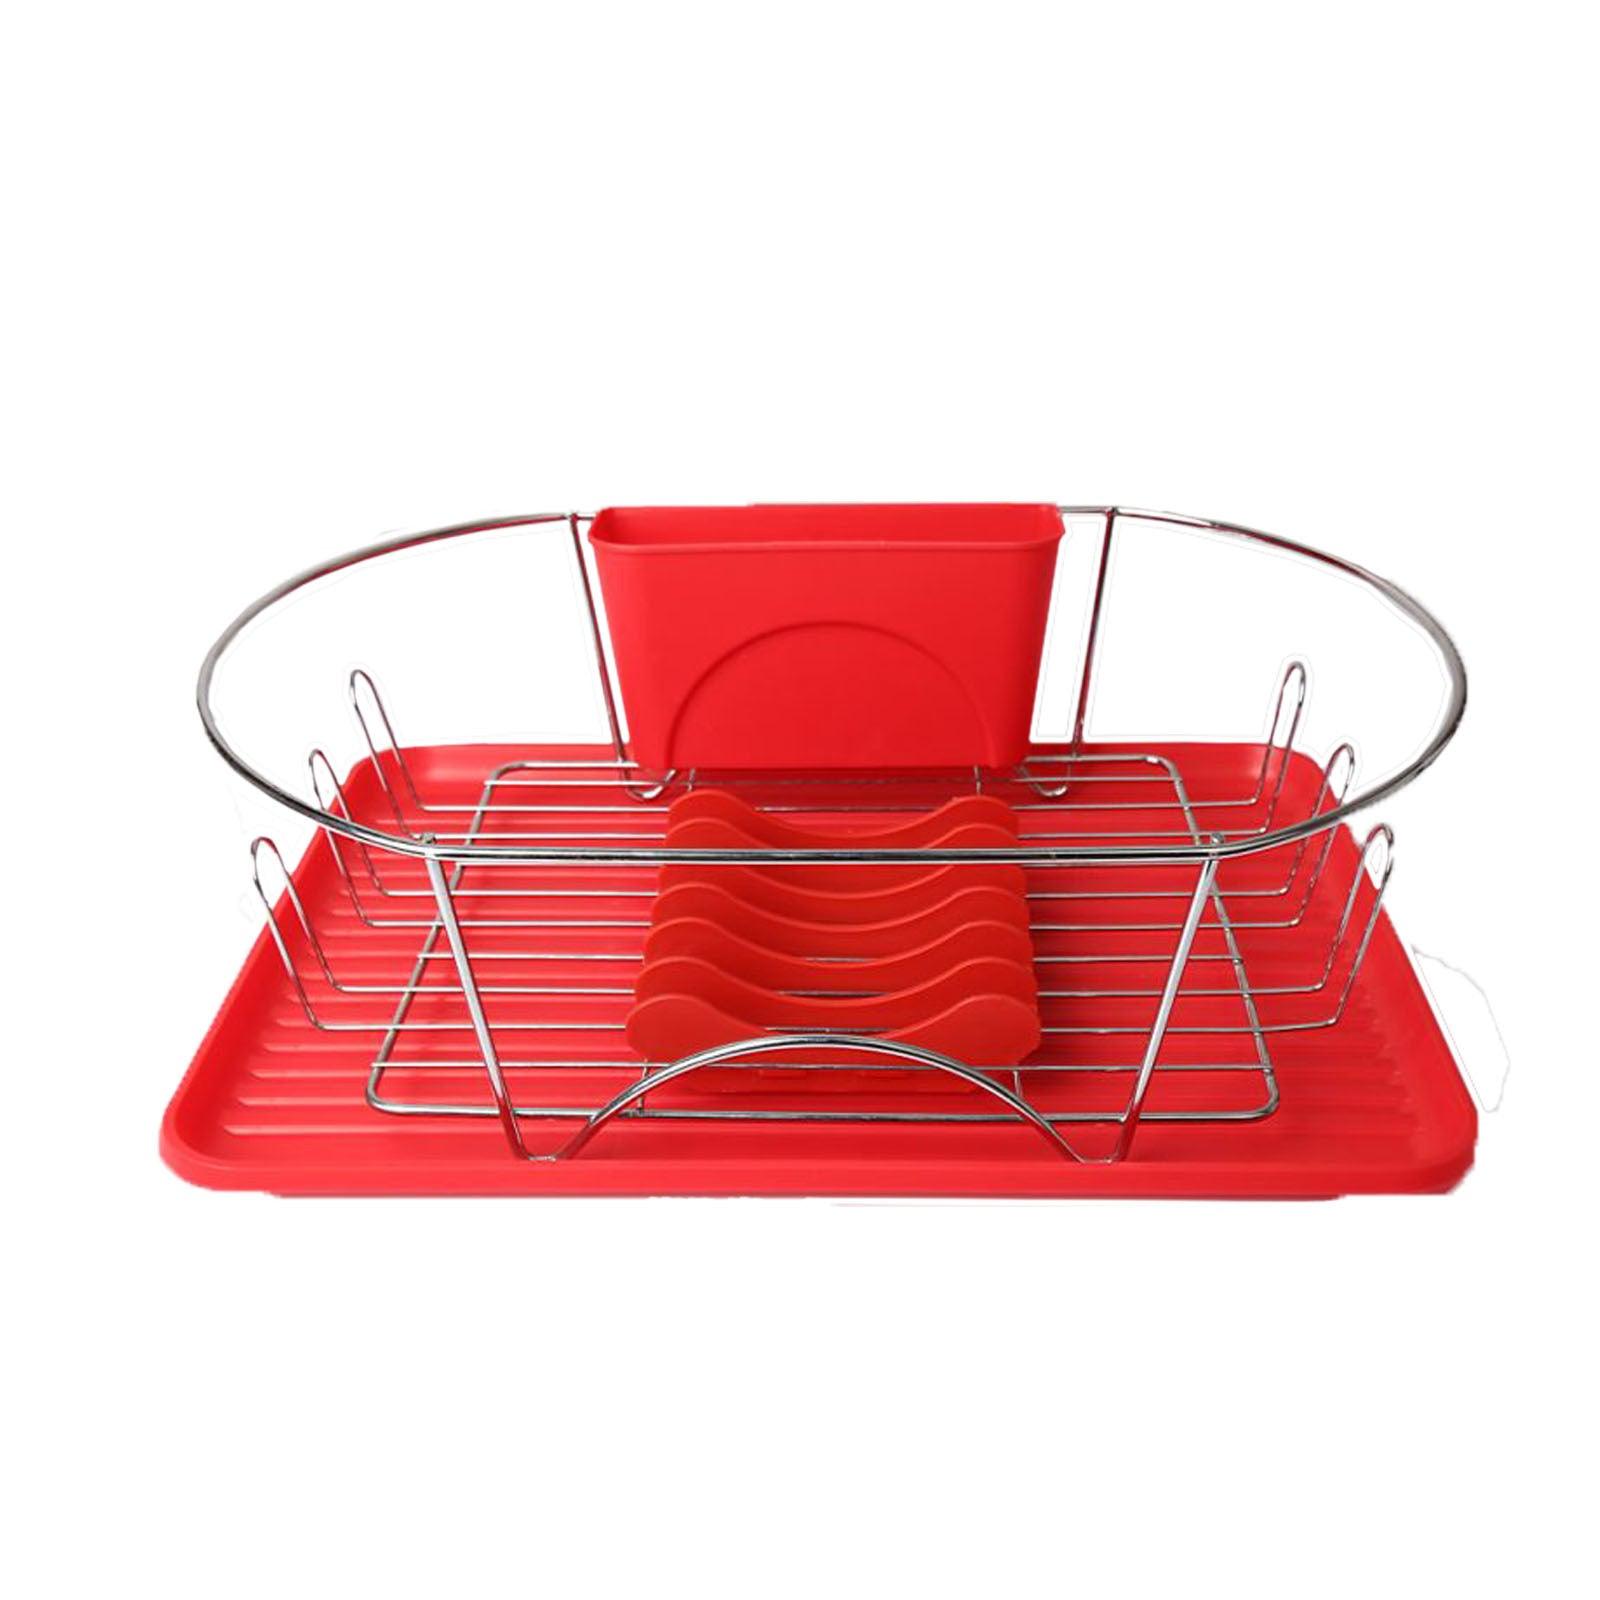 MegaChef 17 Inch Red and Silver Dish Rack with Detachable Utensil holder and a 6 Attachable Plate Positioner FSSA Global B